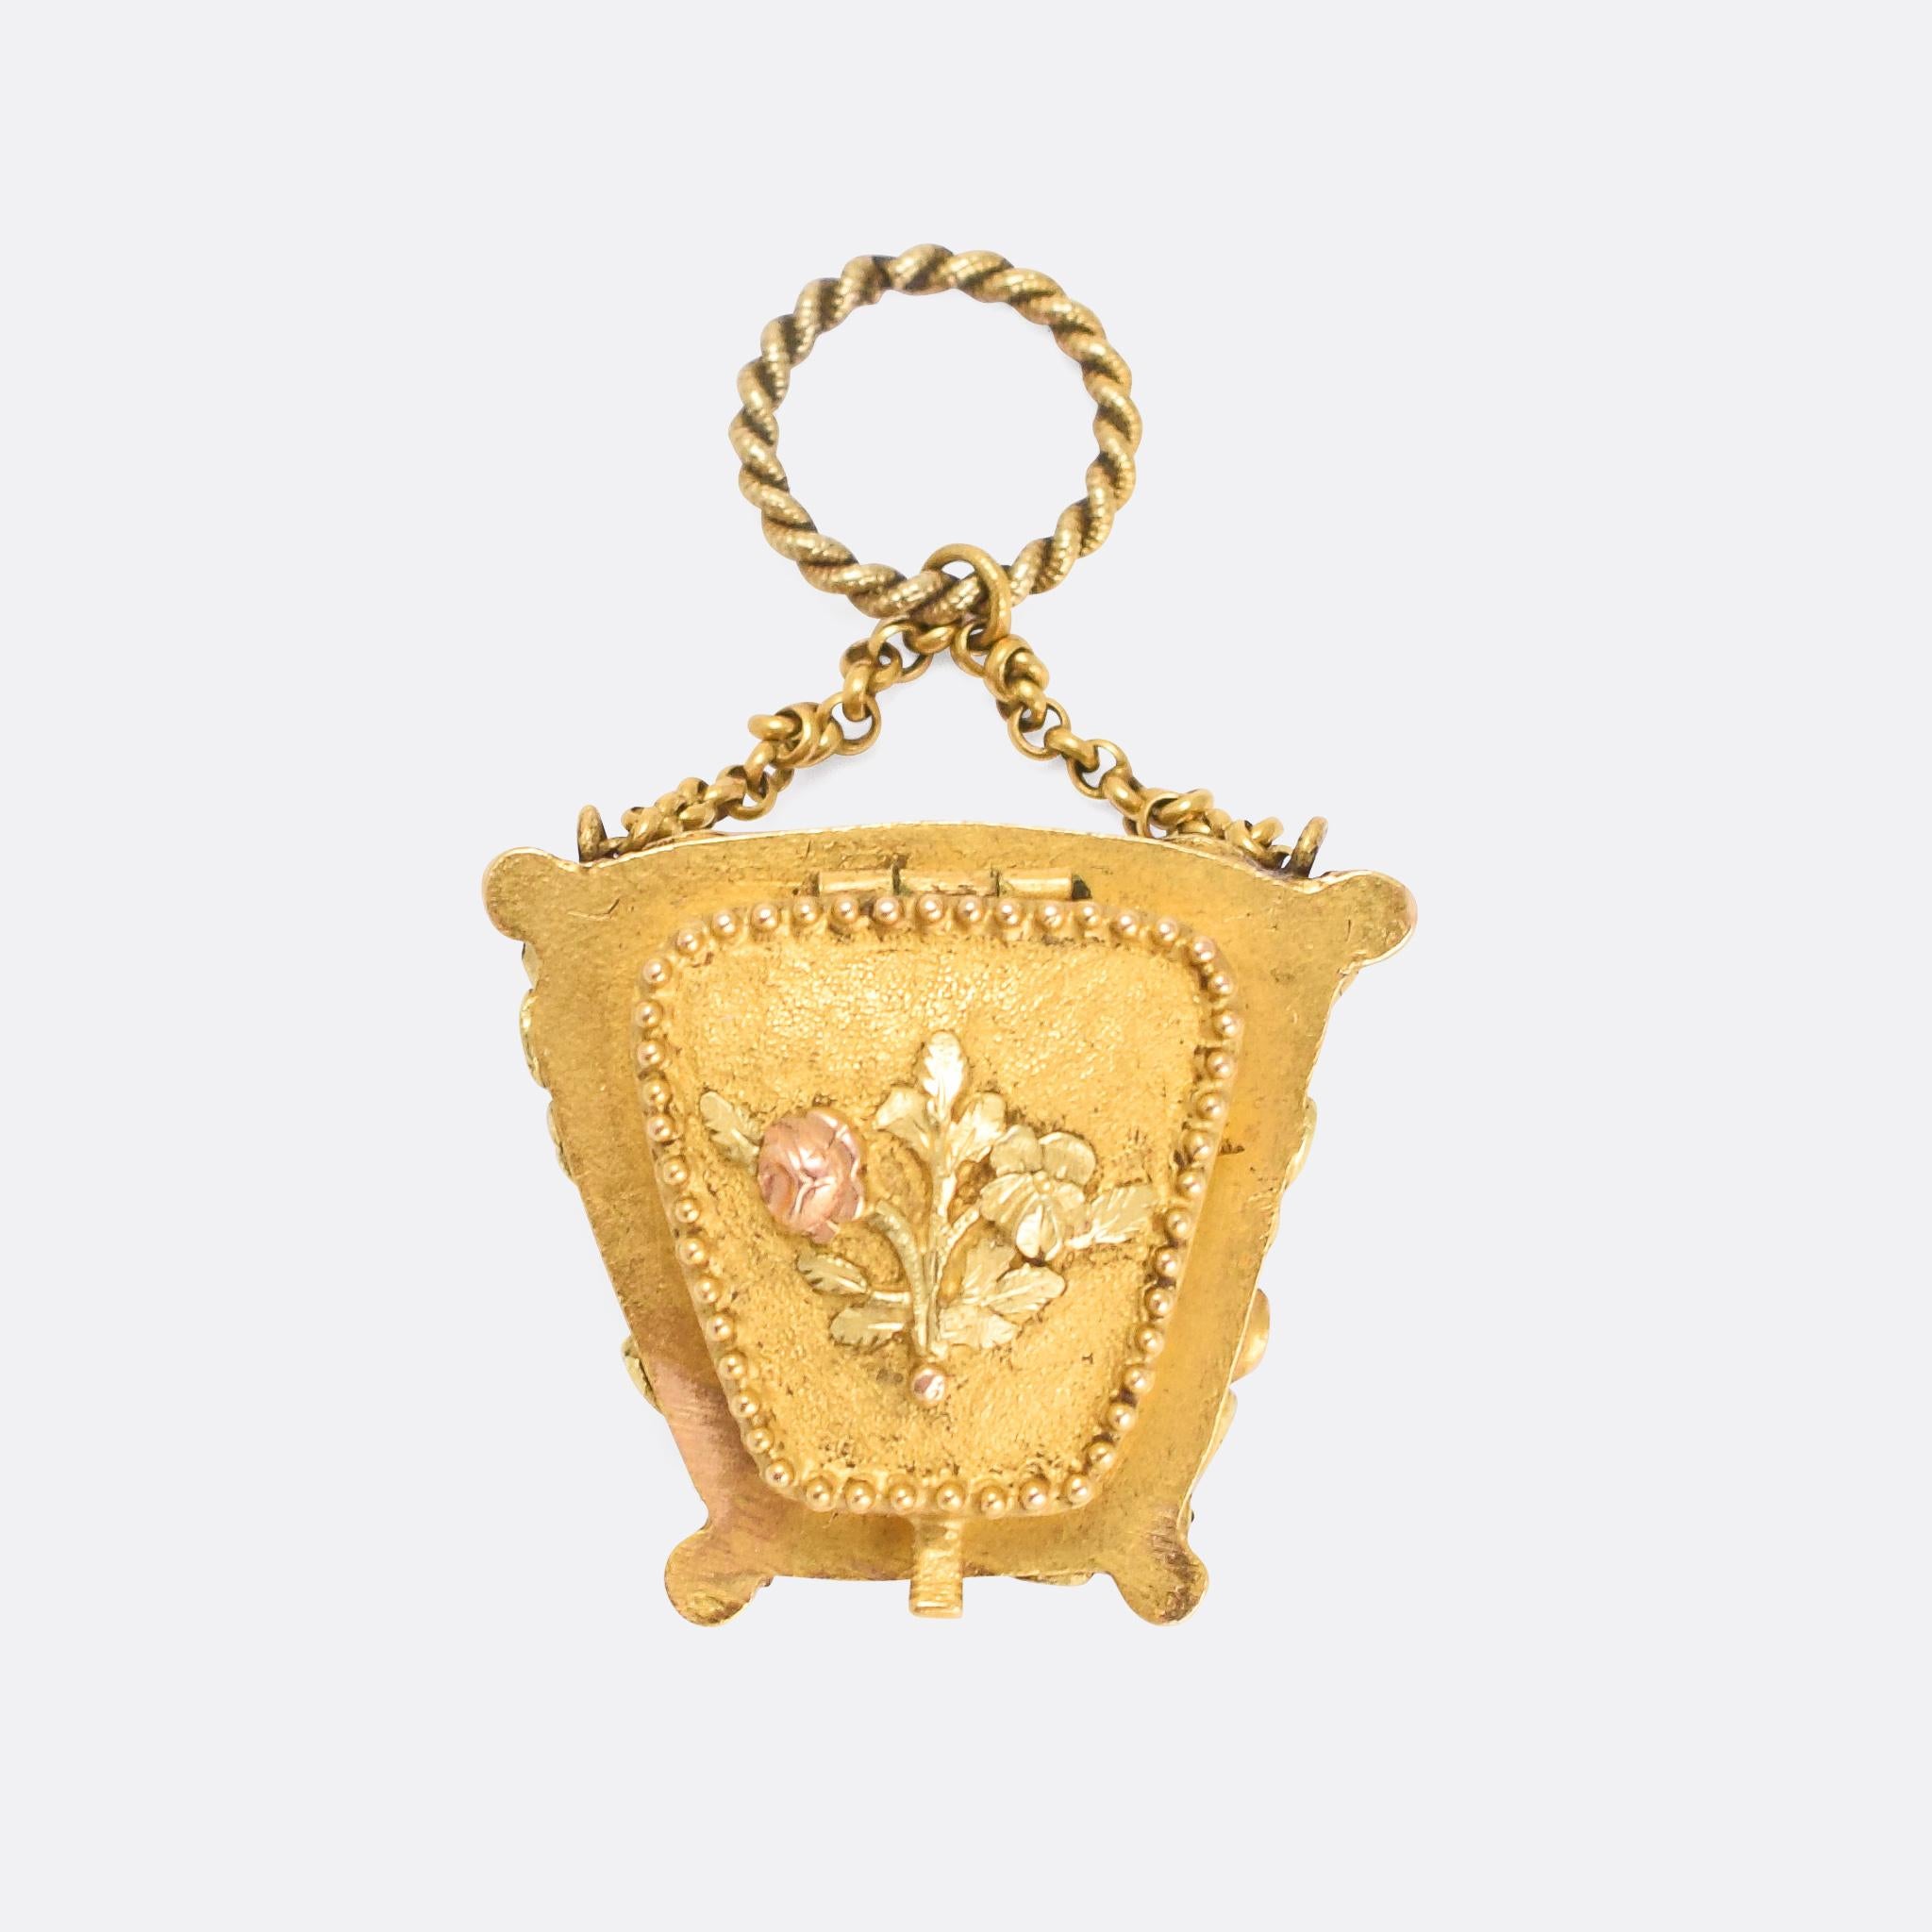 An astonishing Georgian acrostic locket modelled as a purse. The front has the most wonderful applied flowers, in three-tone gold, and is set with stones to spell out the word SOUVENIR - which in this case, translating directly from the French,